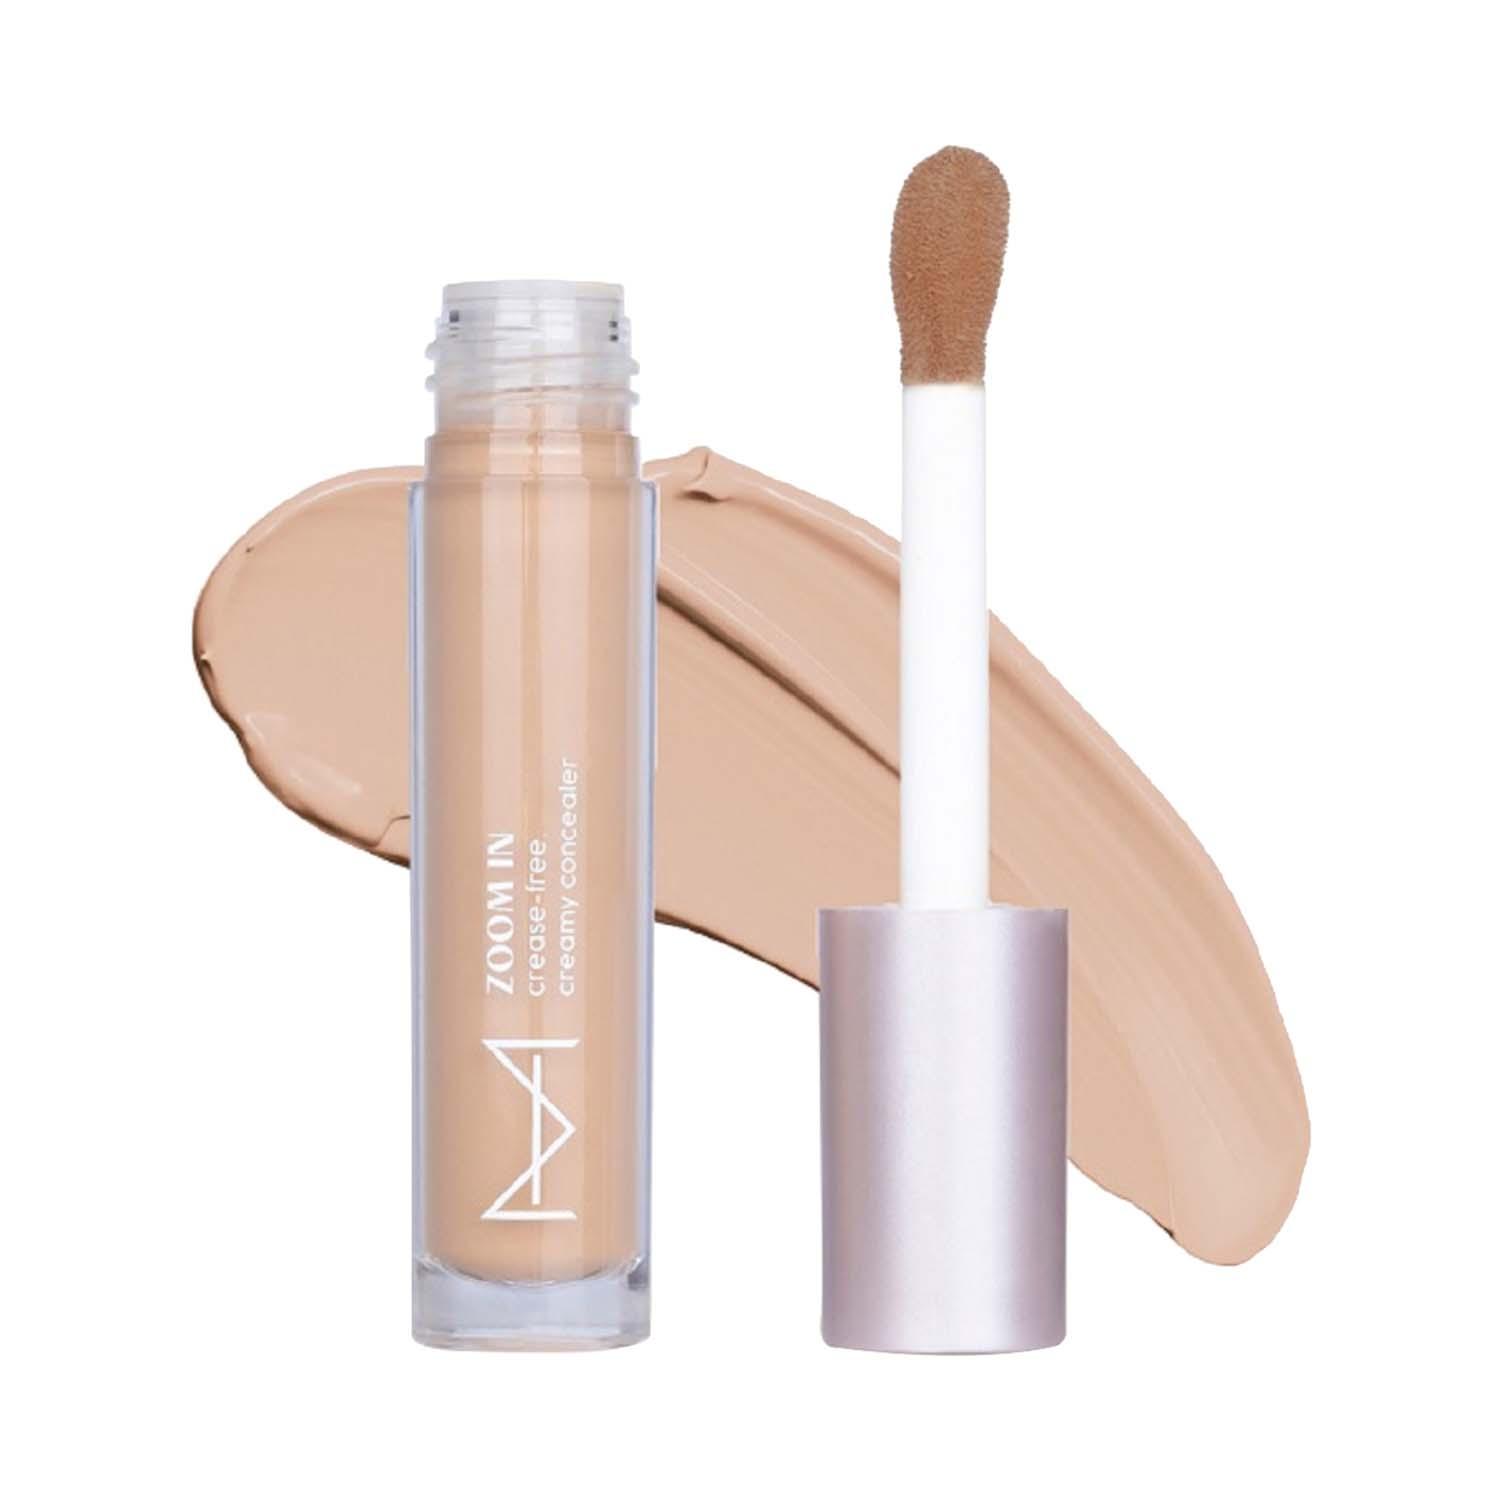 HOUSE OF MAKEUP | HOUSE OF MAKEUP Zoom In Crease-Free, Creamy Concealer - MD02 Medium To Deep Skin Tone (6 ml)